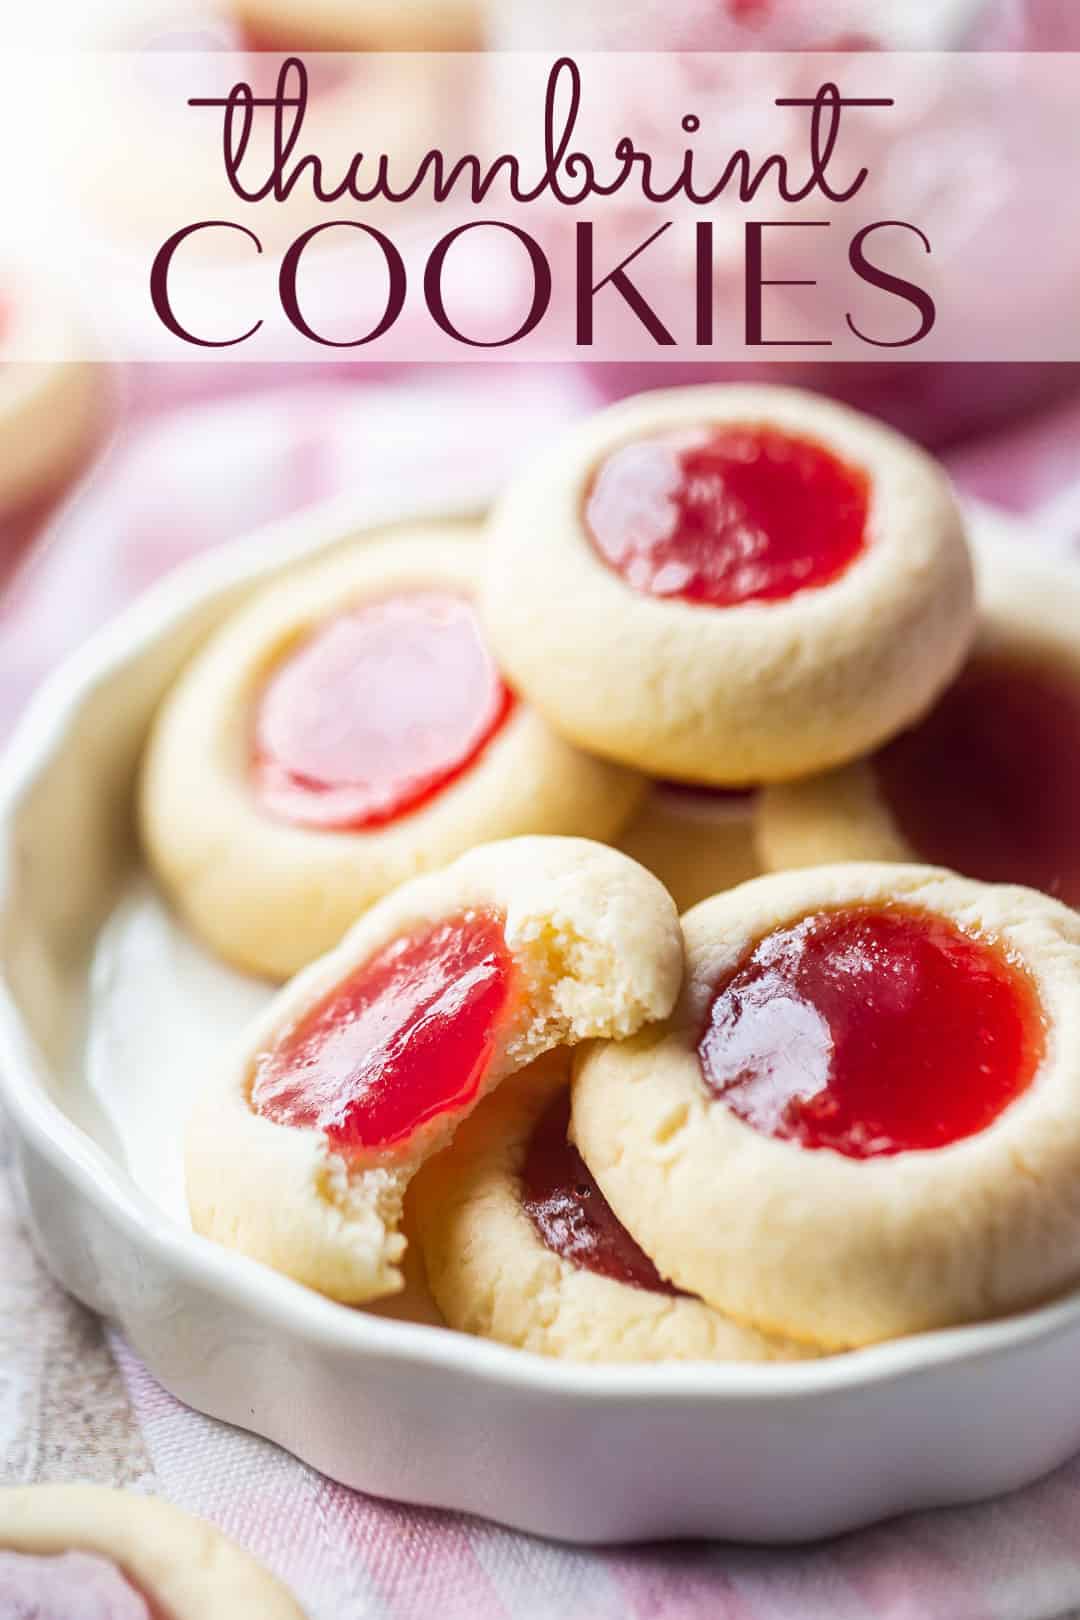 Thumbprint cookie recipe prepared and served in a white ceramic dish with a text overlay above reading "Thumbprint Cookies."